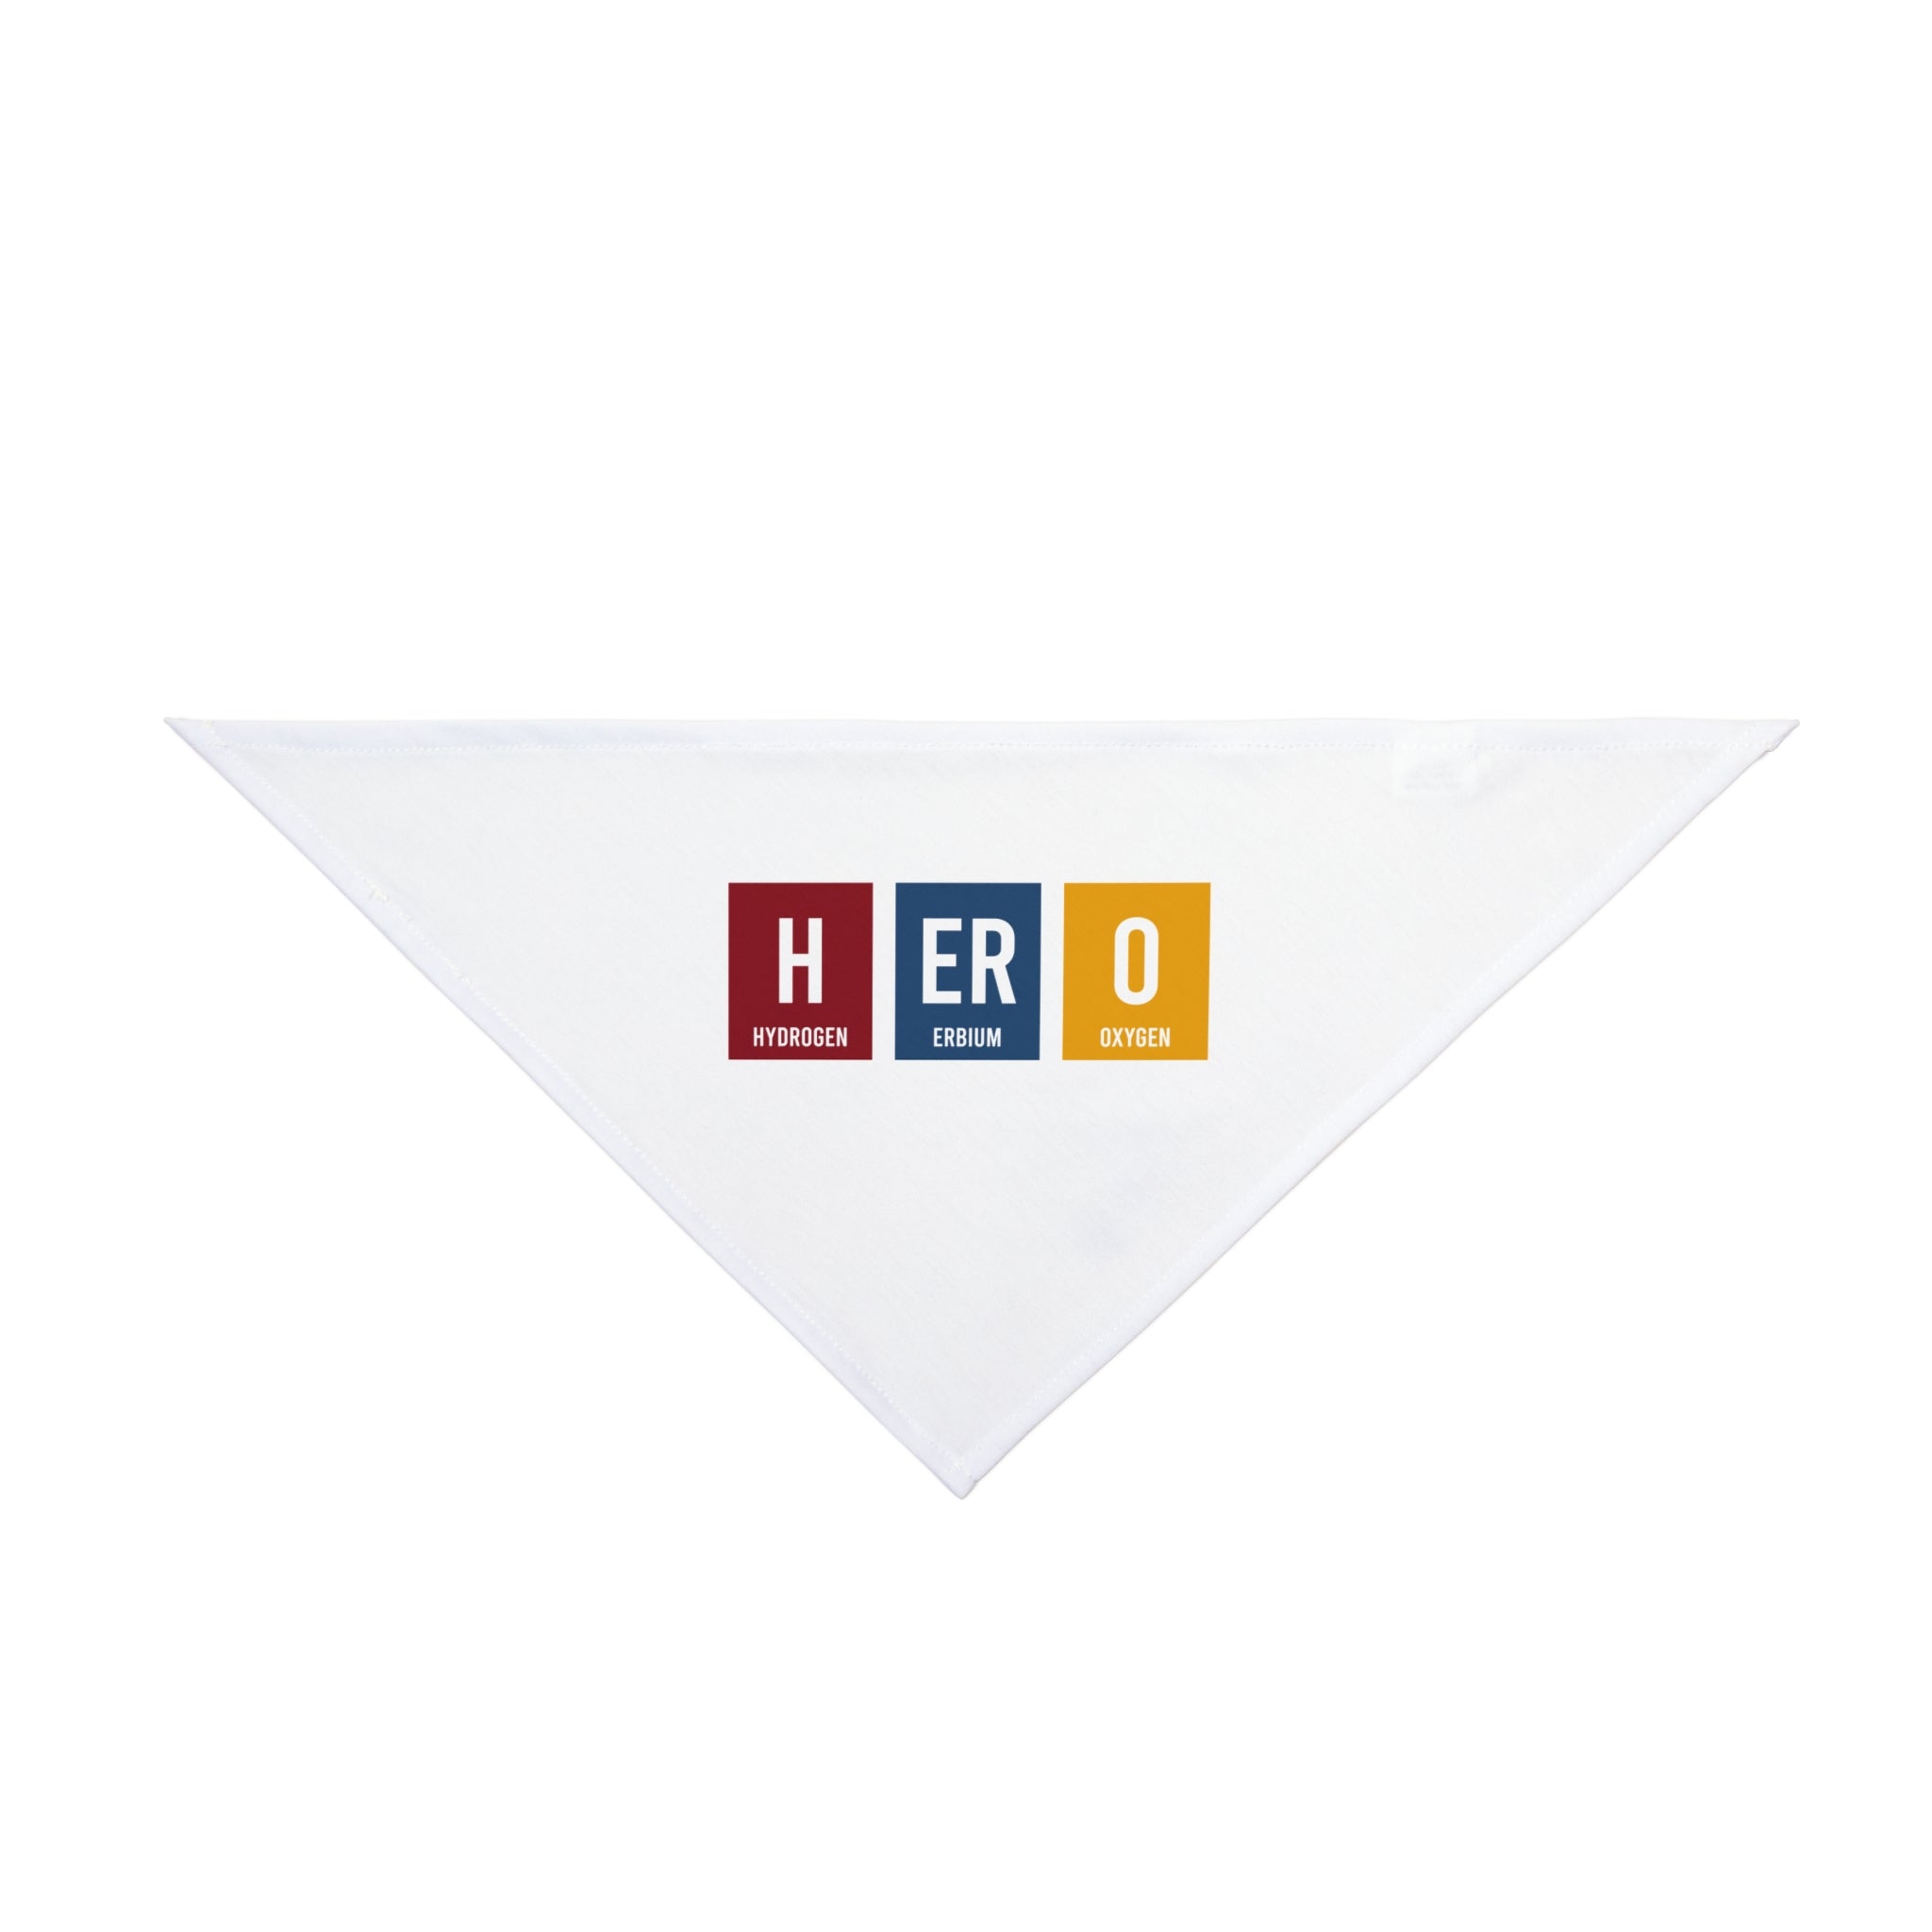 White triangular bandana featuring chemical elements one-letter symbols "H," "Er," and "O" in colored boxes spelling "HERO." Made from soft-spun polyester, this pet-friendly HERO - Pet Bandana ensures comfort and style for your furry friend.